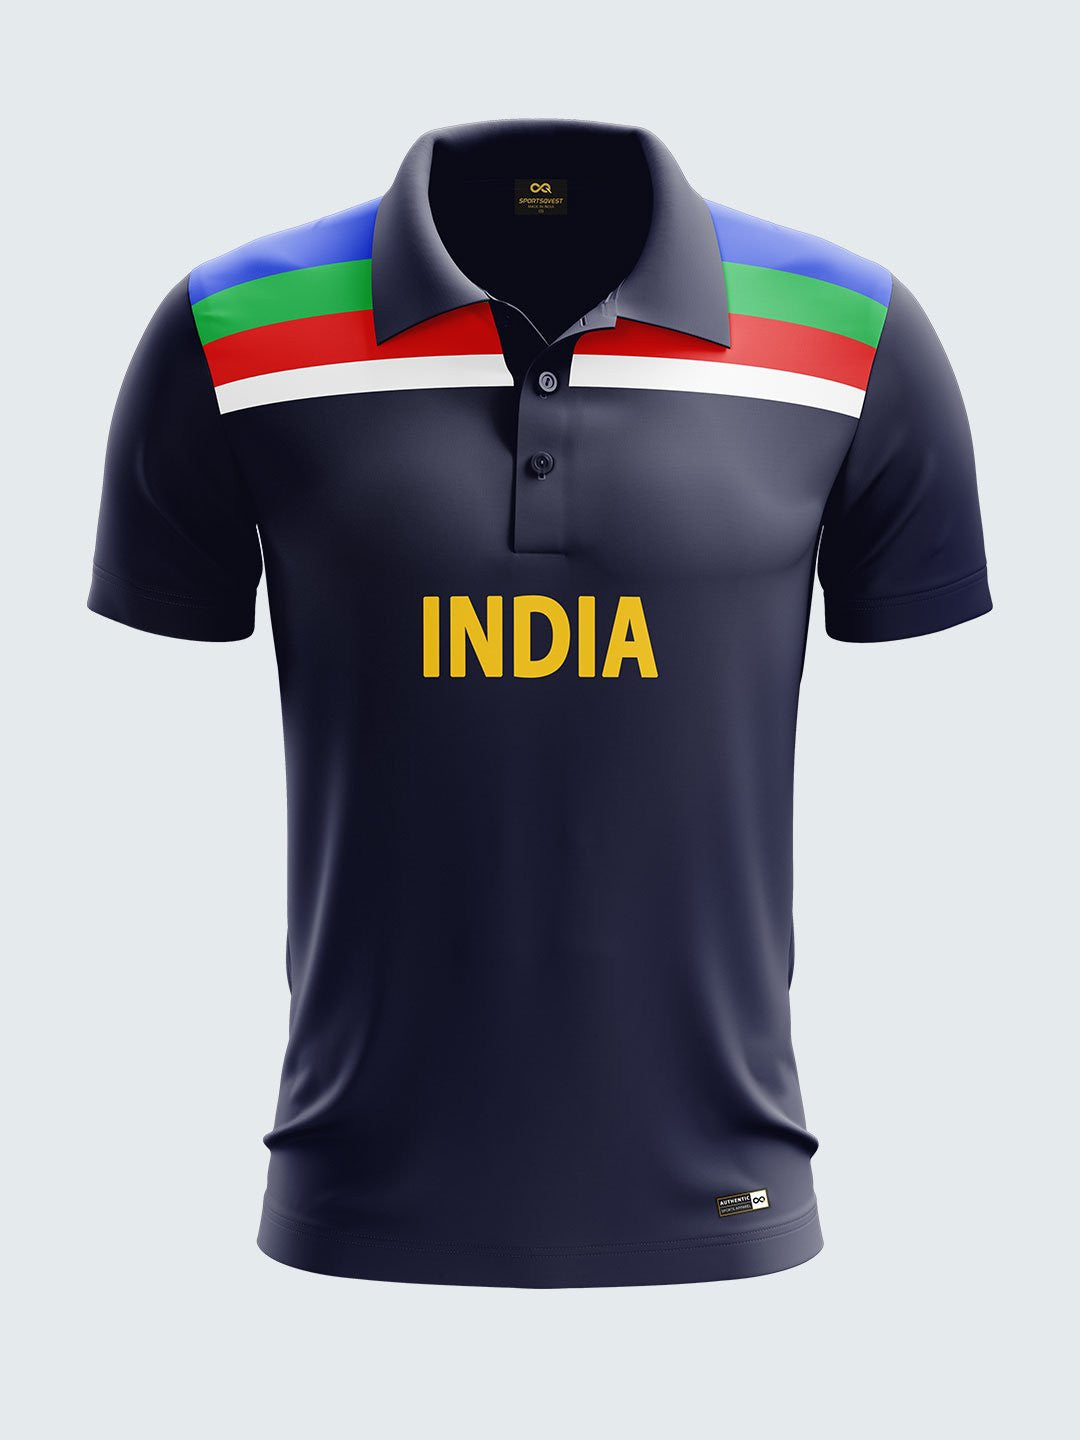 india cricket jersey for sale